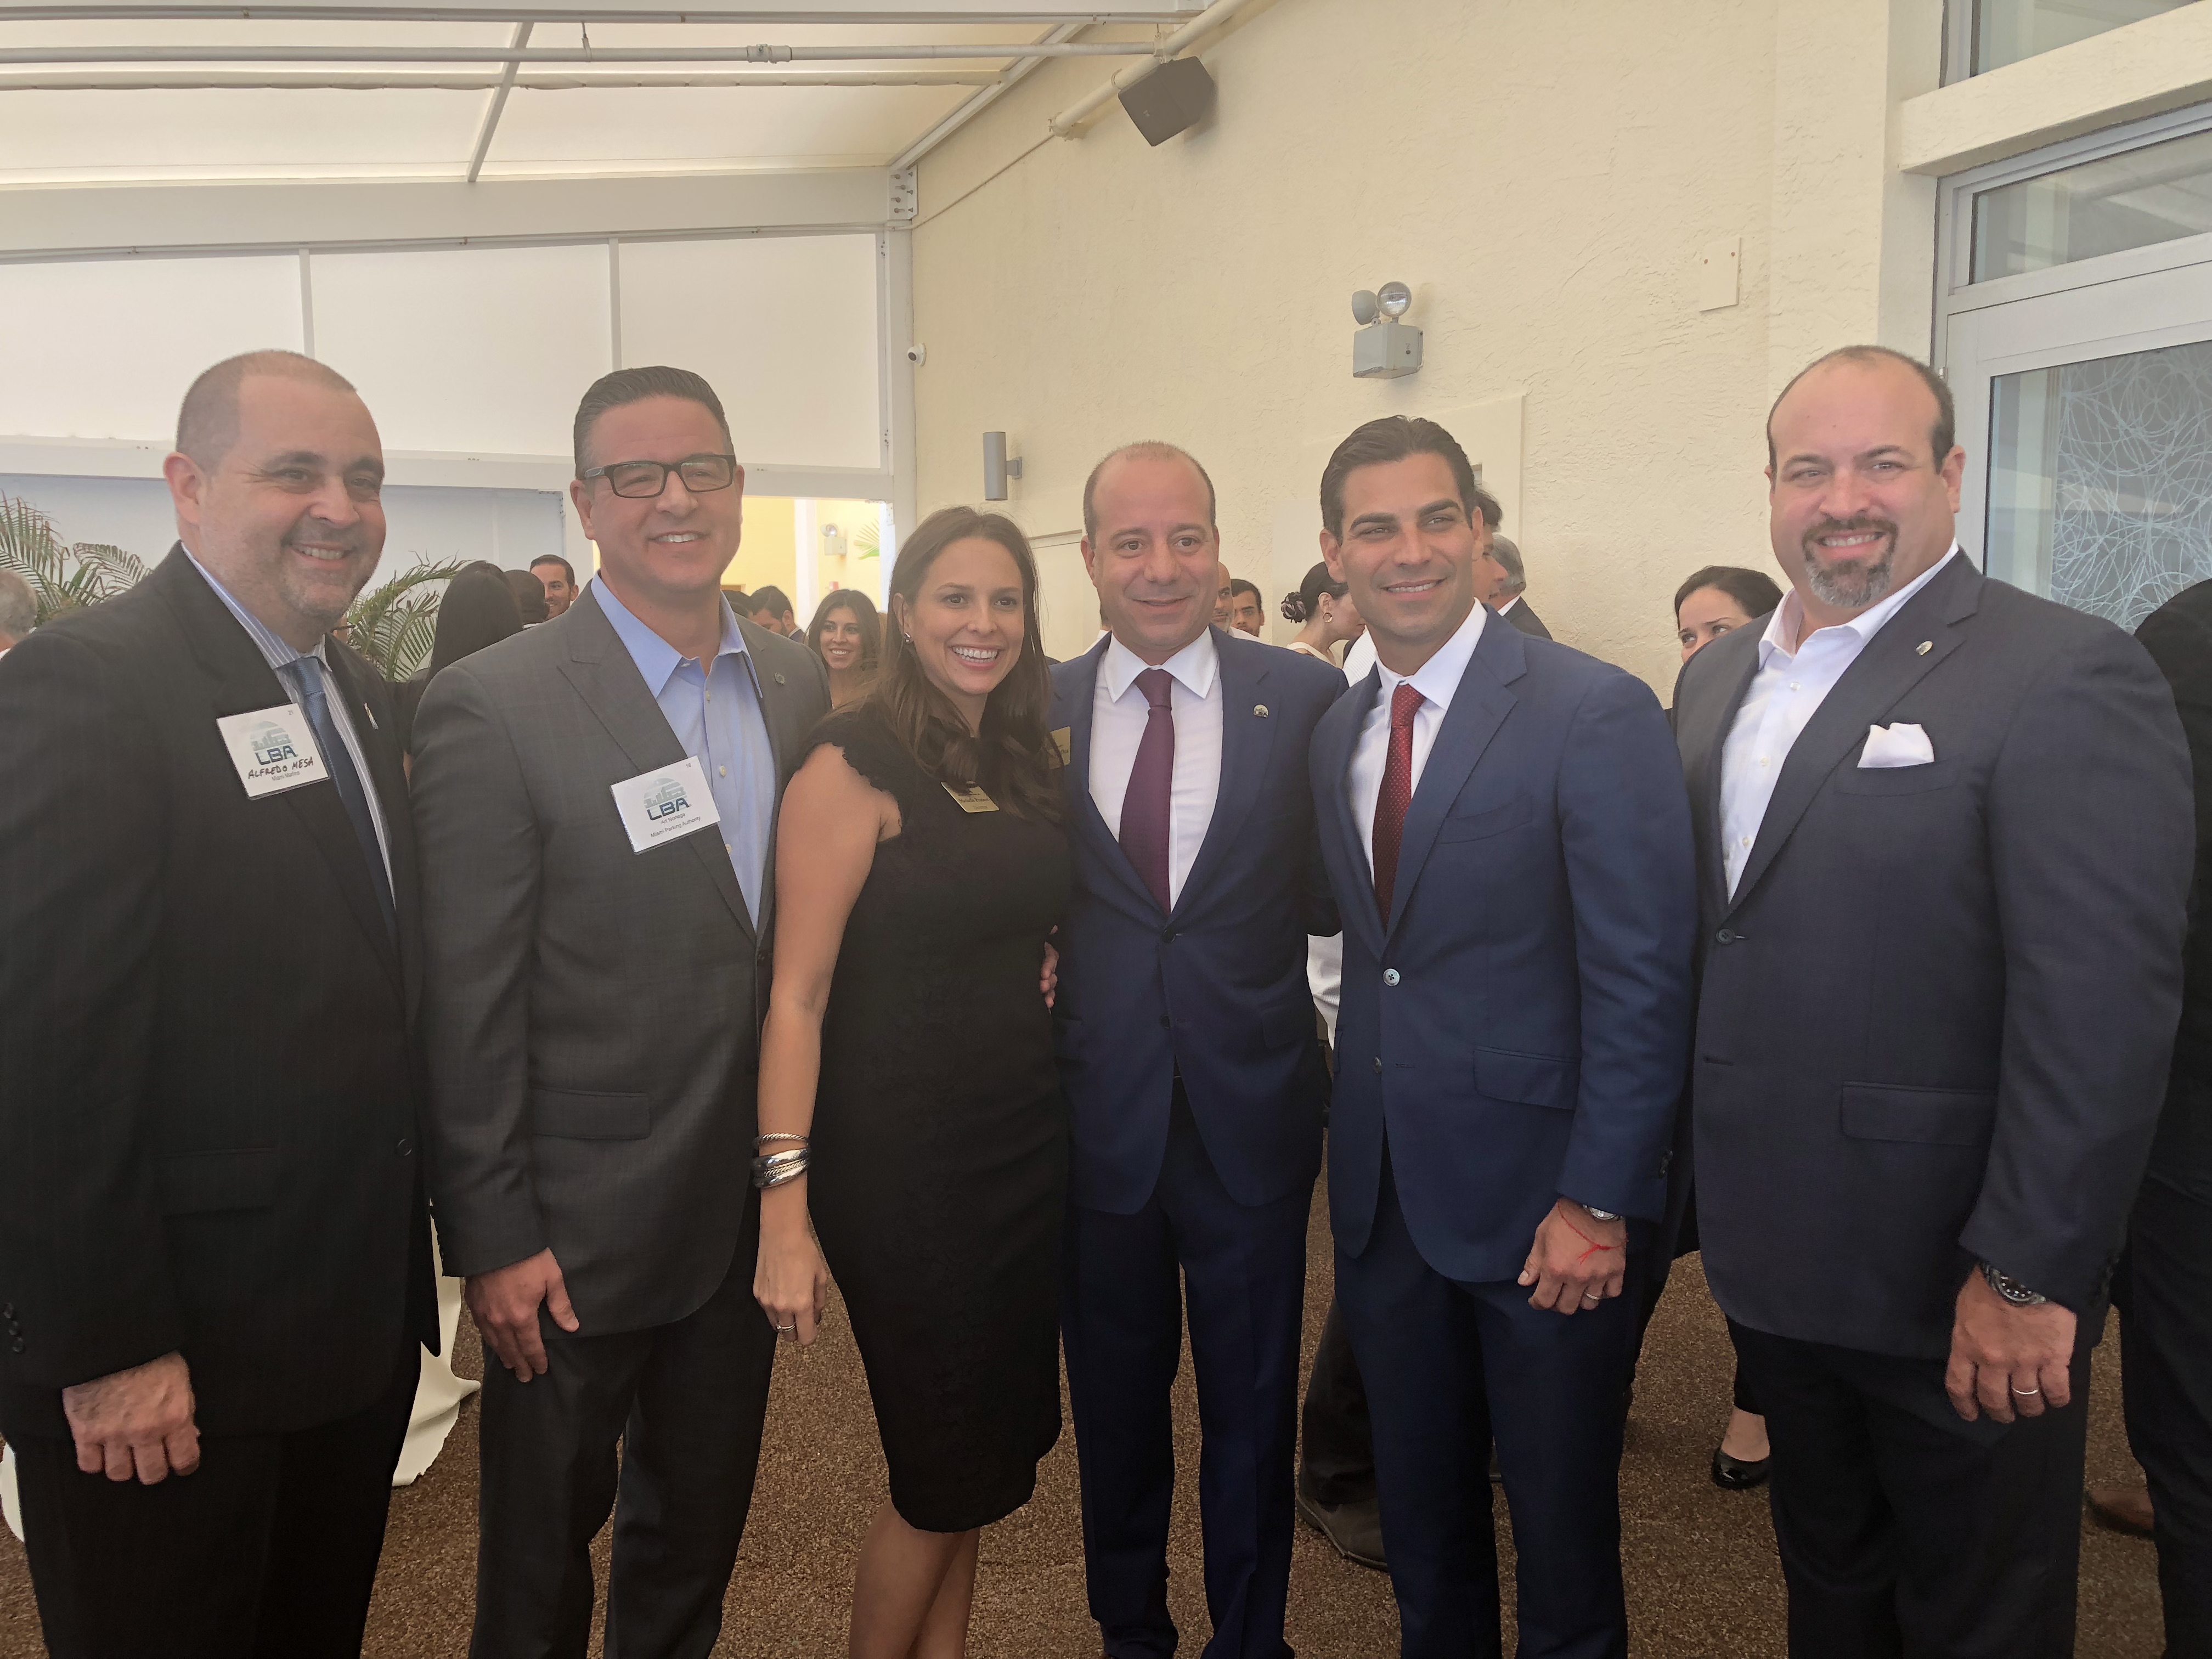 LBA October Luncheon with Miami Mayor Candidate, Francis Suarez